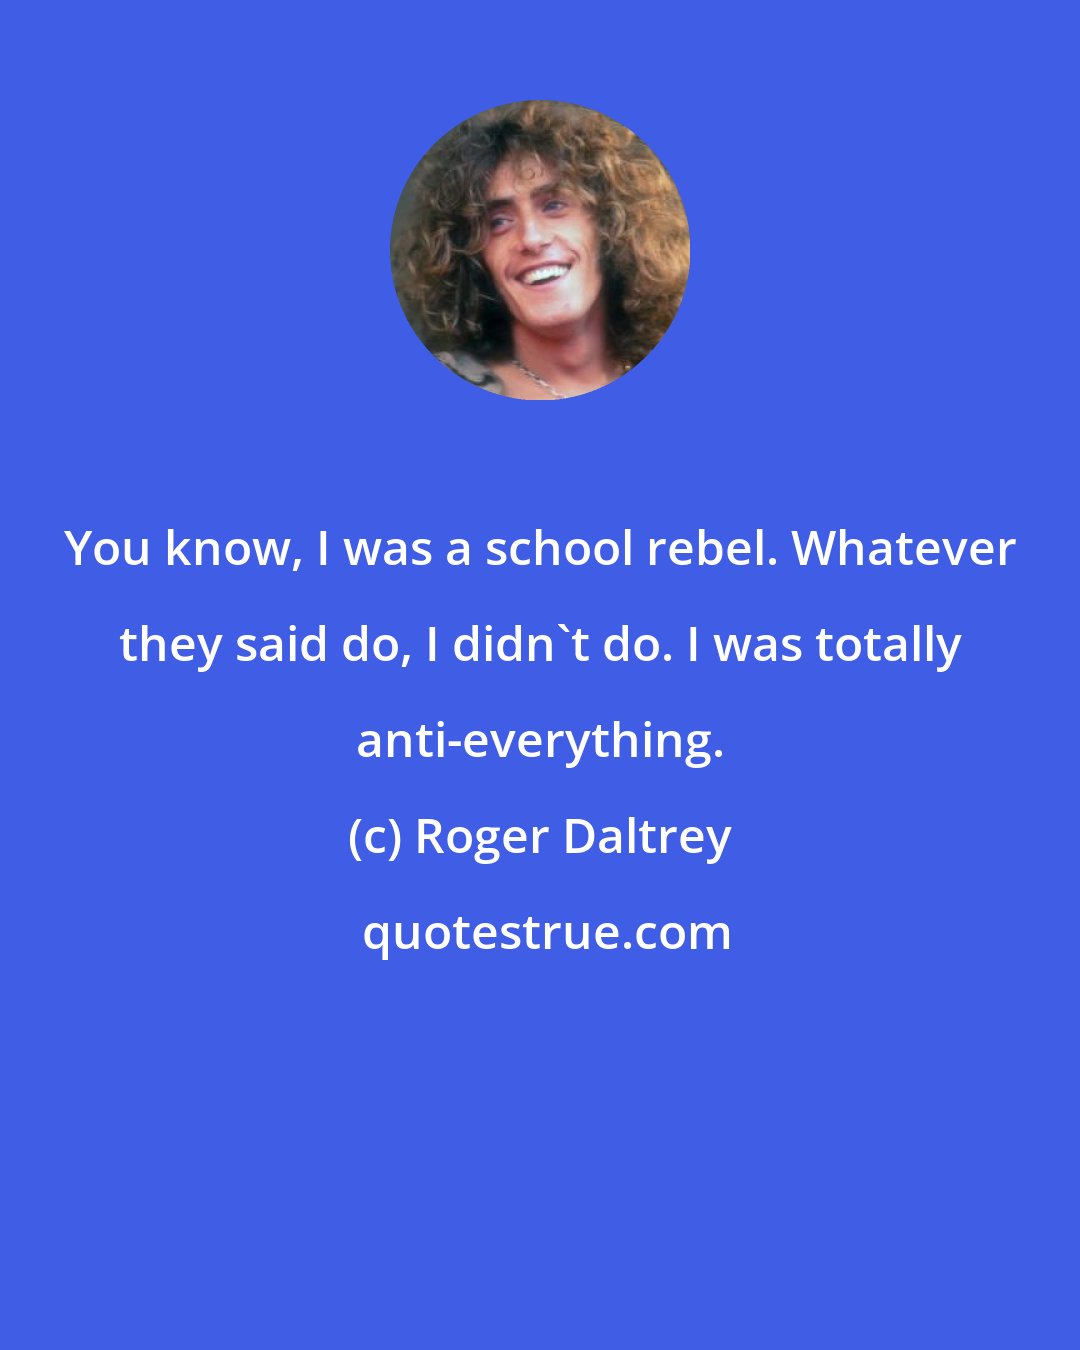 Roger Daltrey: You know, I was a school rebel. Whatever they said do, I didn't do. I was totally anti-everything.